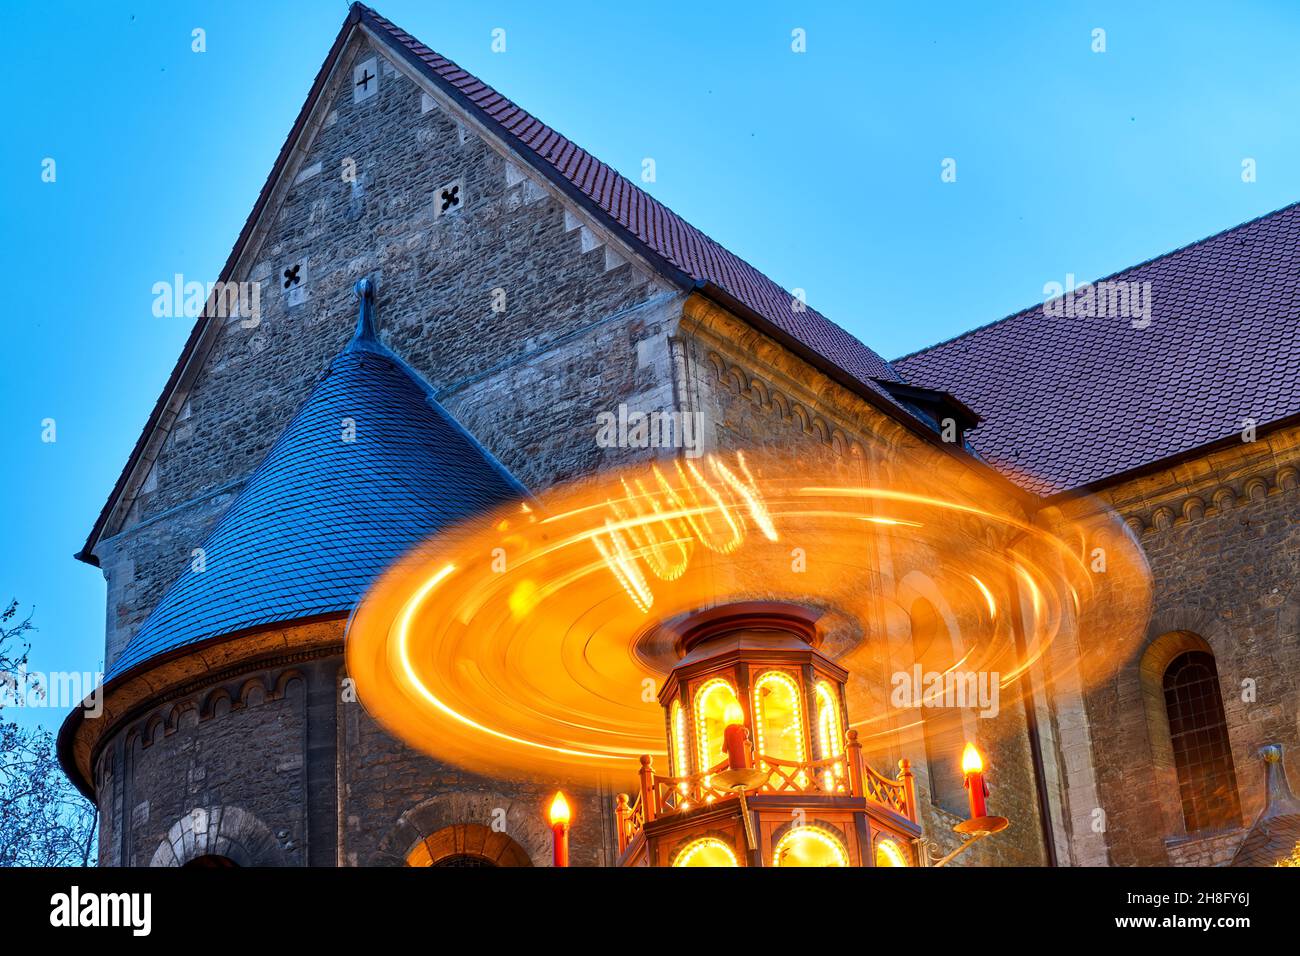 Braunschweig, Germany, November 28, 2021: Rotating illuminated Christmas pyramid in front of the Brunswick Cathedral at the Christmas Market Stock Photo